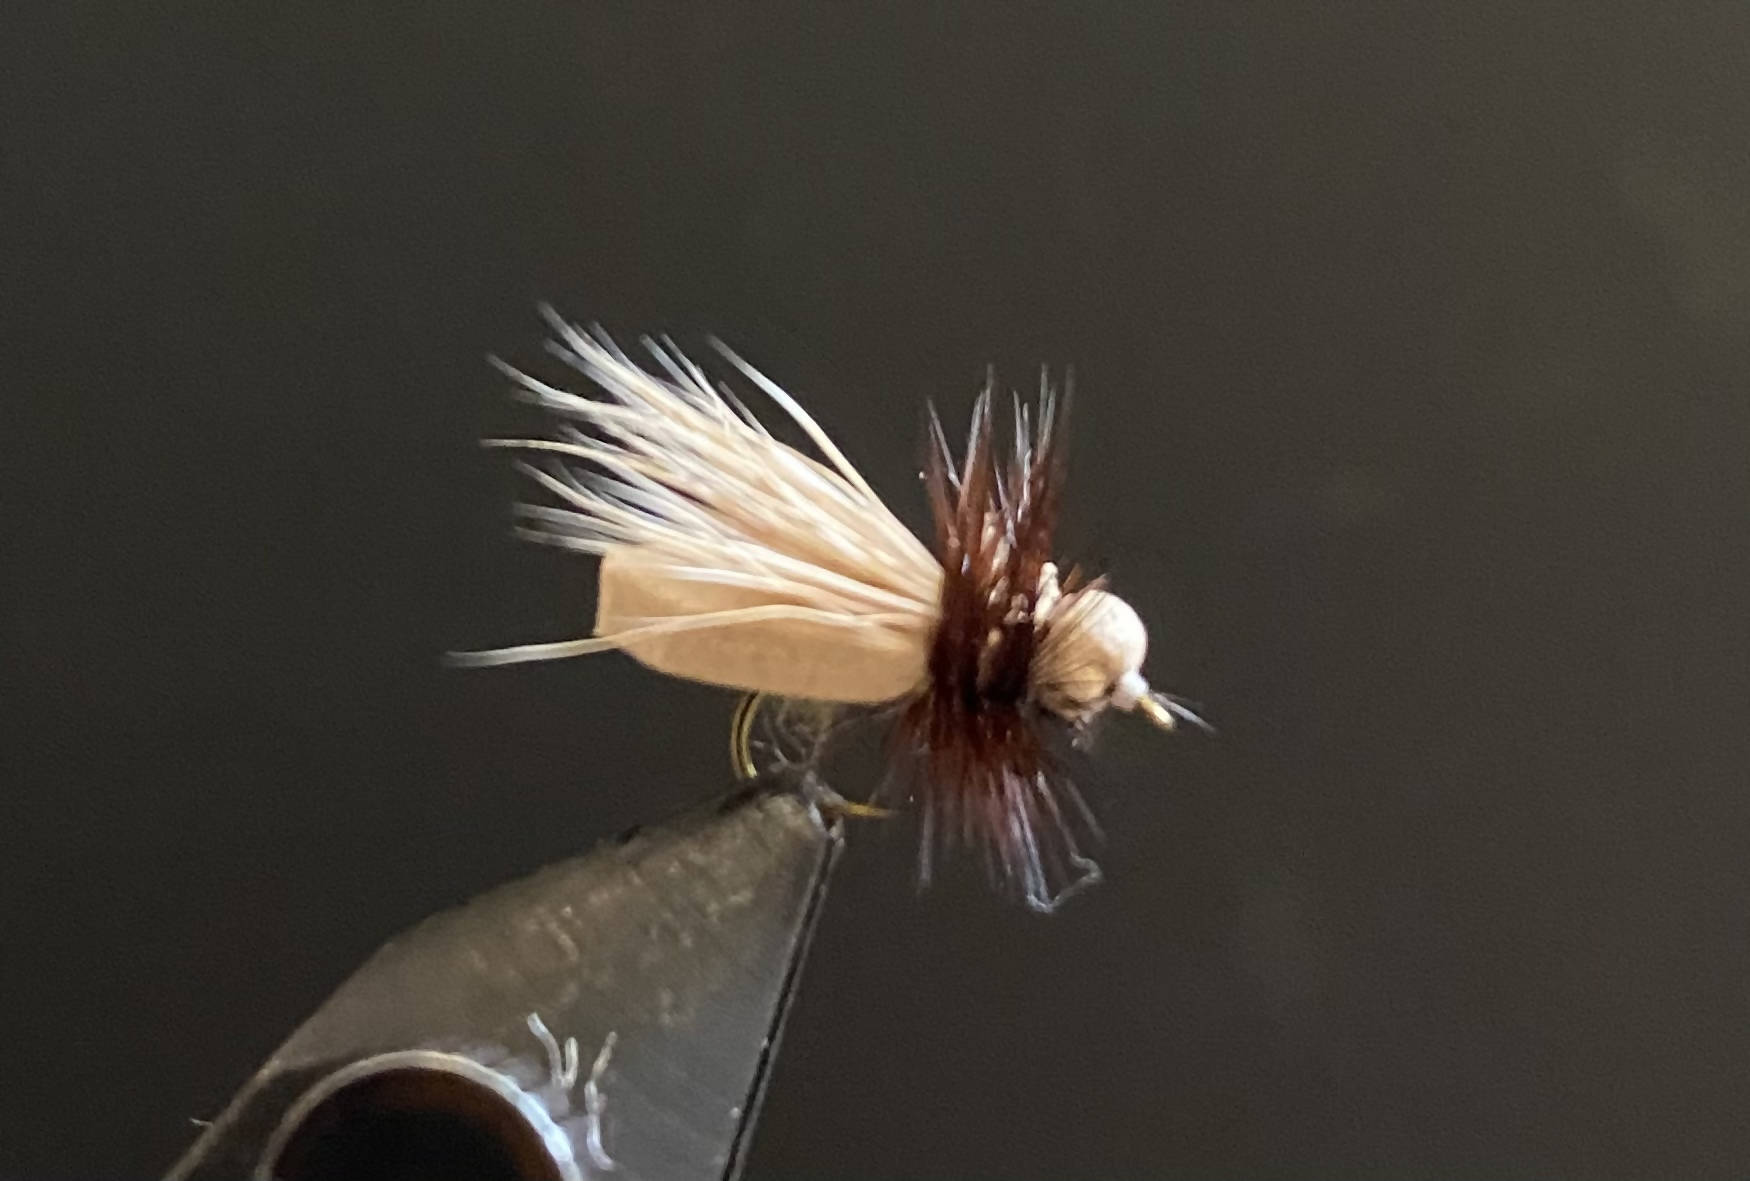 Trout Fly Assortment - Dry Fly Nymph Dropper Indie Tandem Fly Fishing Rig  Collection